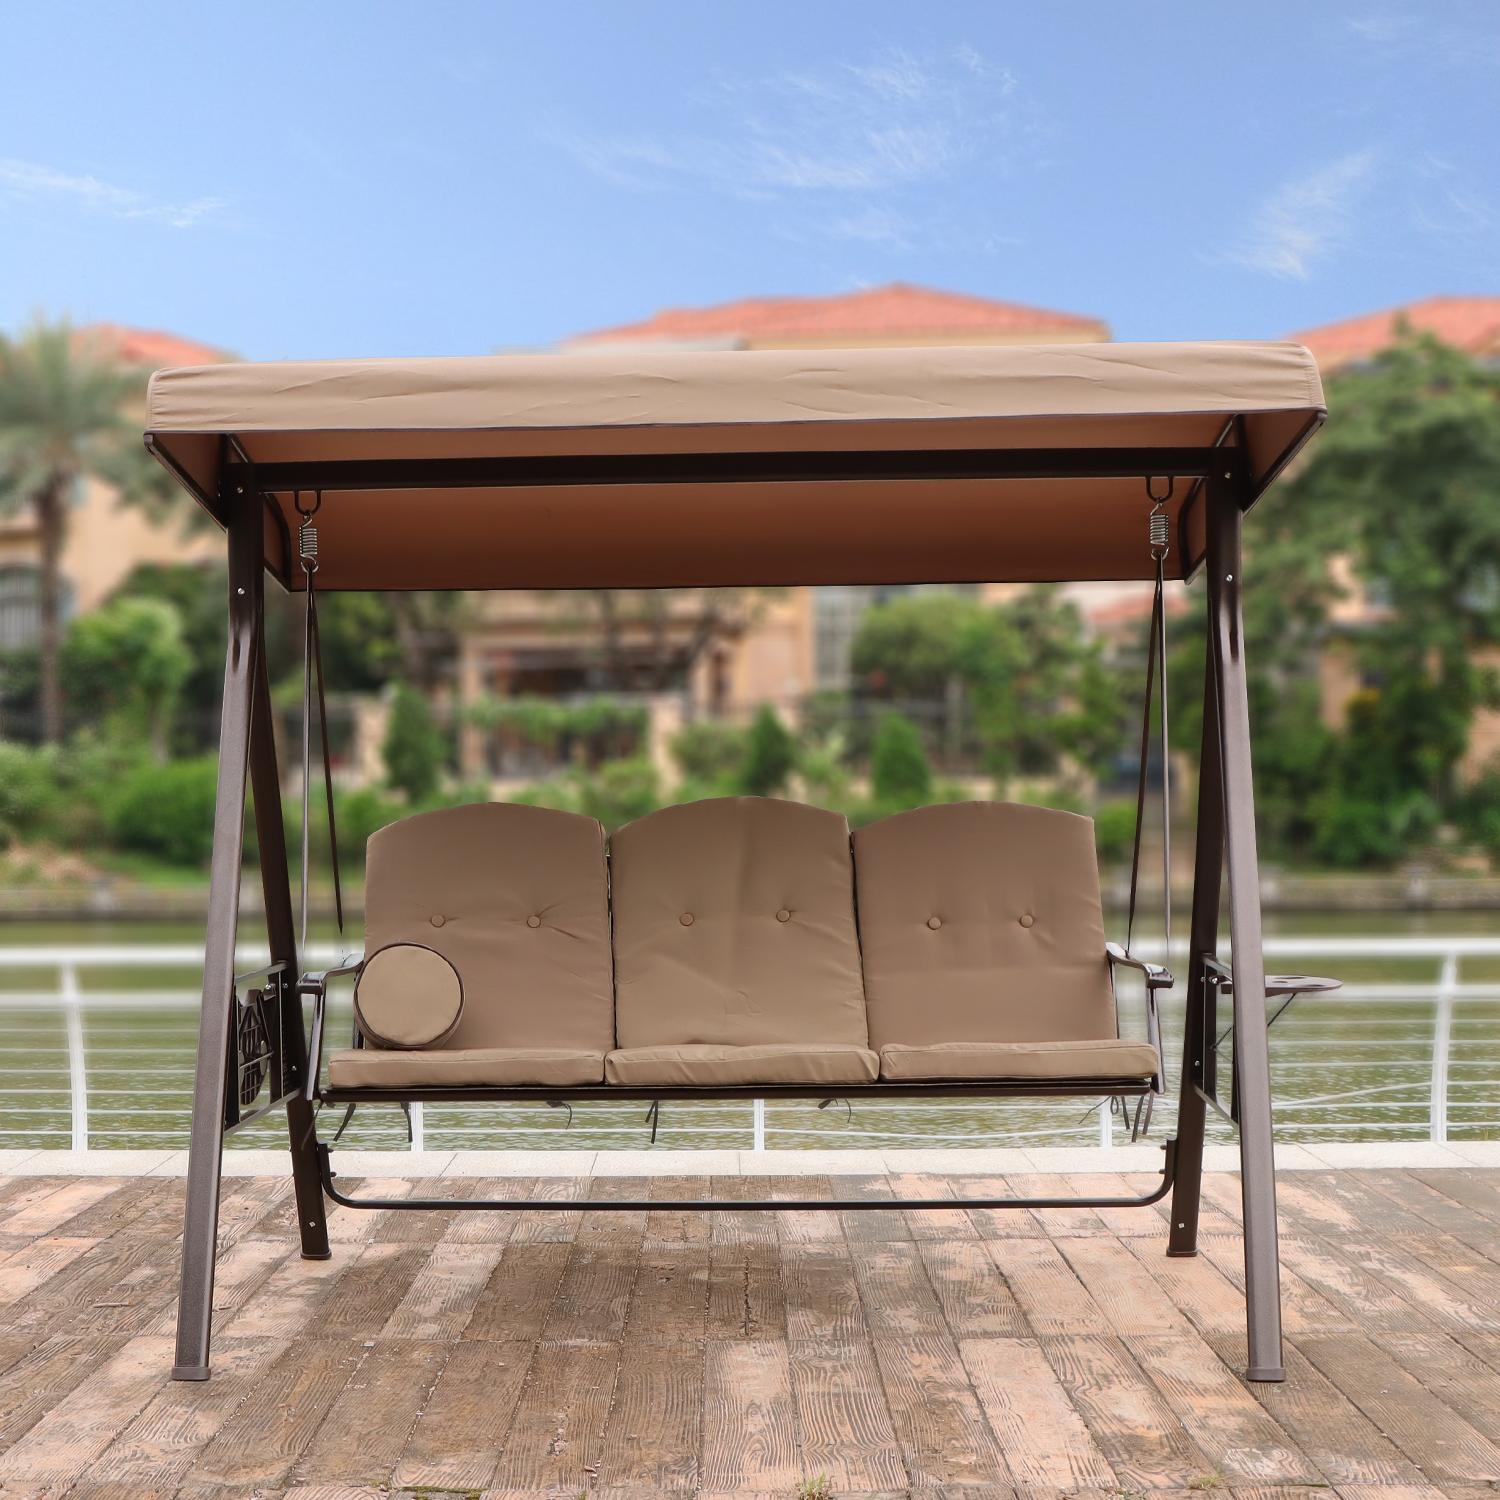 Leisure 3-Seat Patio Swing Glider Outdoor Canopy with Removable Cushions and Pillows for Backyard, Adjustable Shade Chair Hammock Lounge Chair Porch Garden with Side Tray and Steel Frame - Beige - image 3 of 8